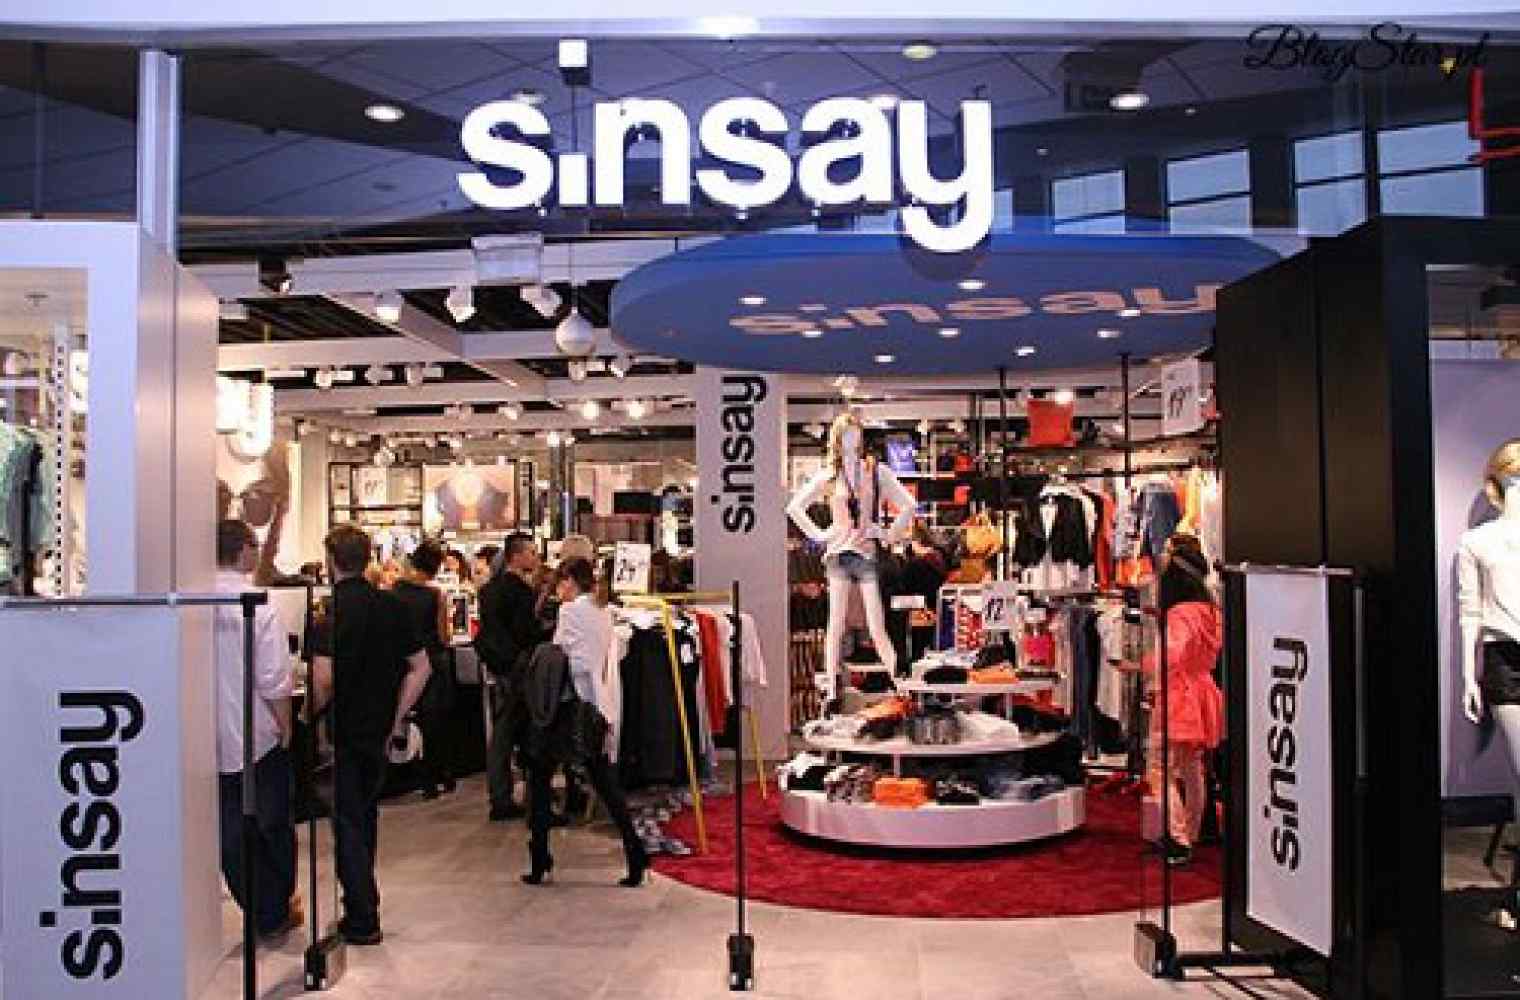 Youth fashion shop Sinsay will be opened in shopping and entertainment center Respublika